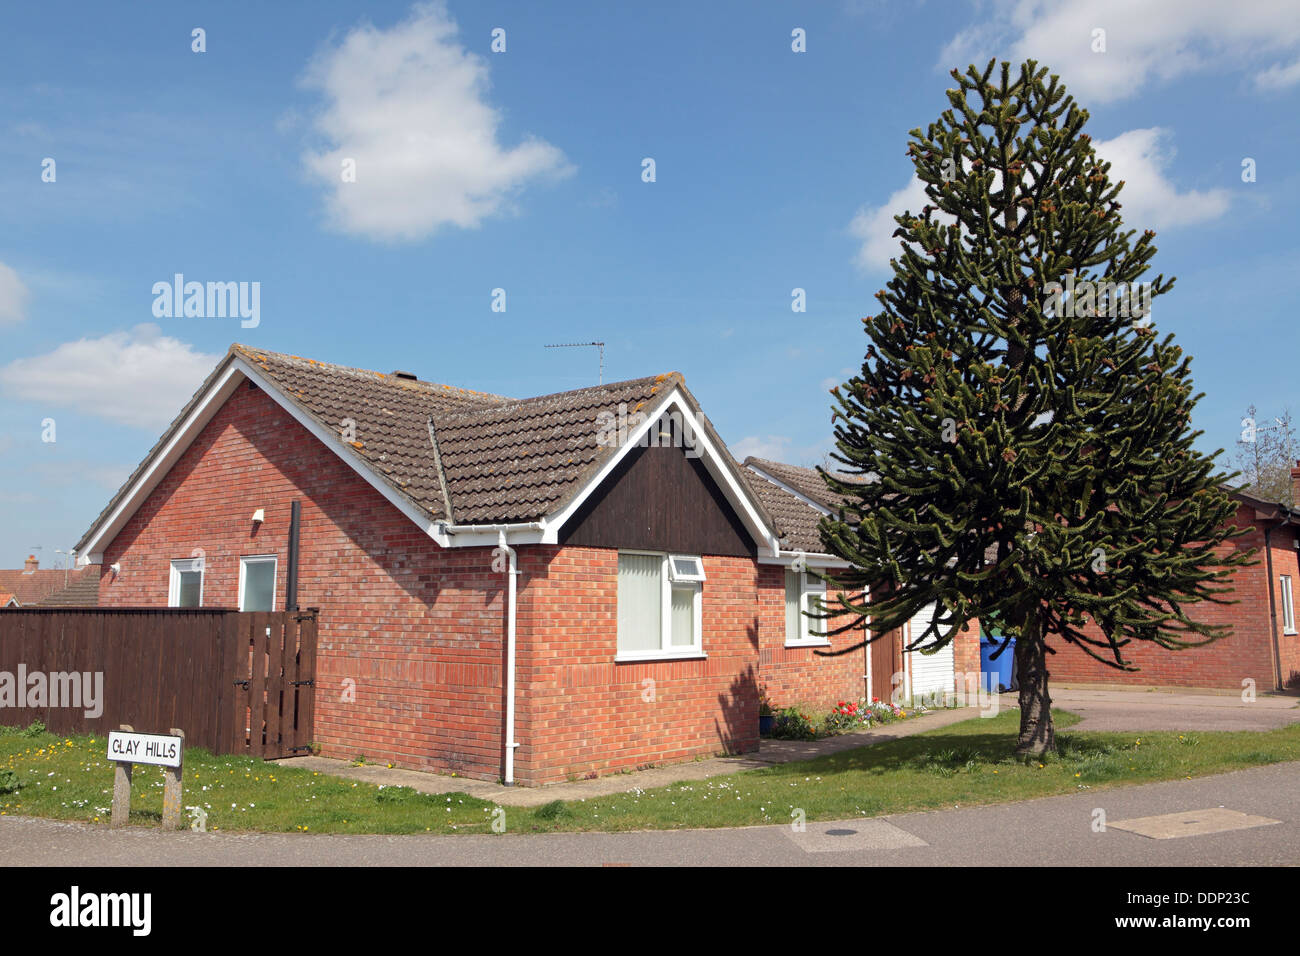 Bungalow in Halesworth with large out of proportion pine tree in garden Stock Photo